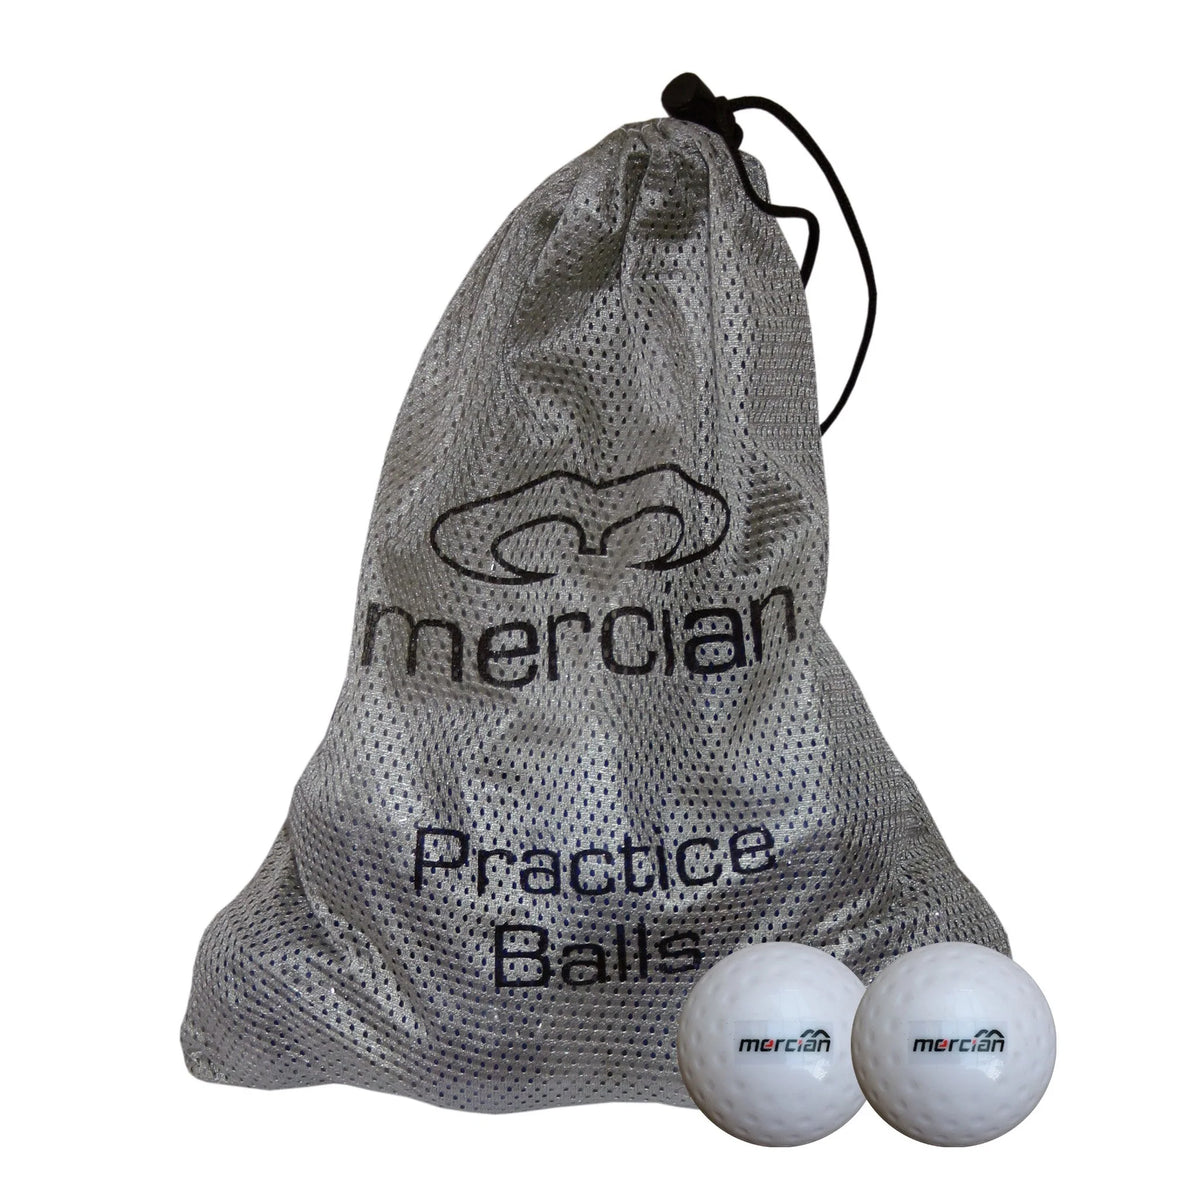 Mercian Dimple Practice Ball - 12 in a Bag